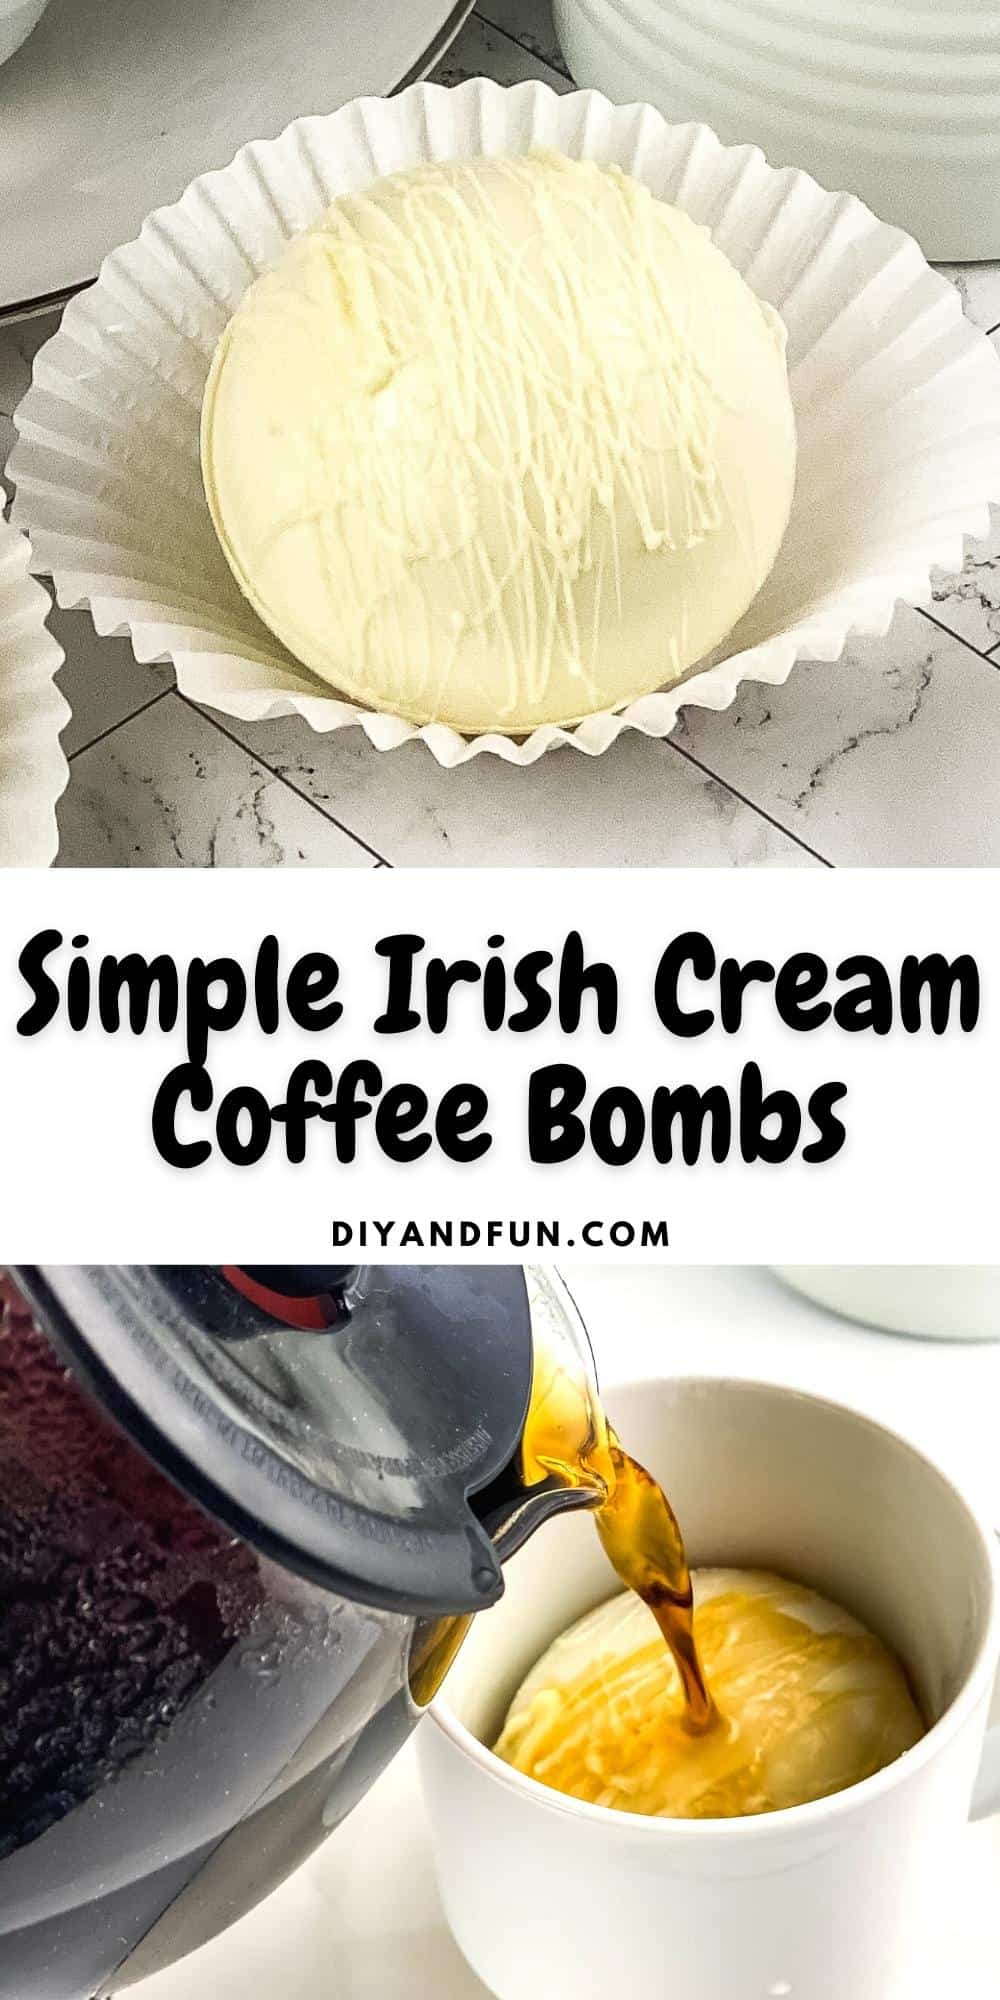 Simple Irish Cream Coffee Bombs, an easy recipe for making a flavorful addition to warm coffee. Includes creamer.